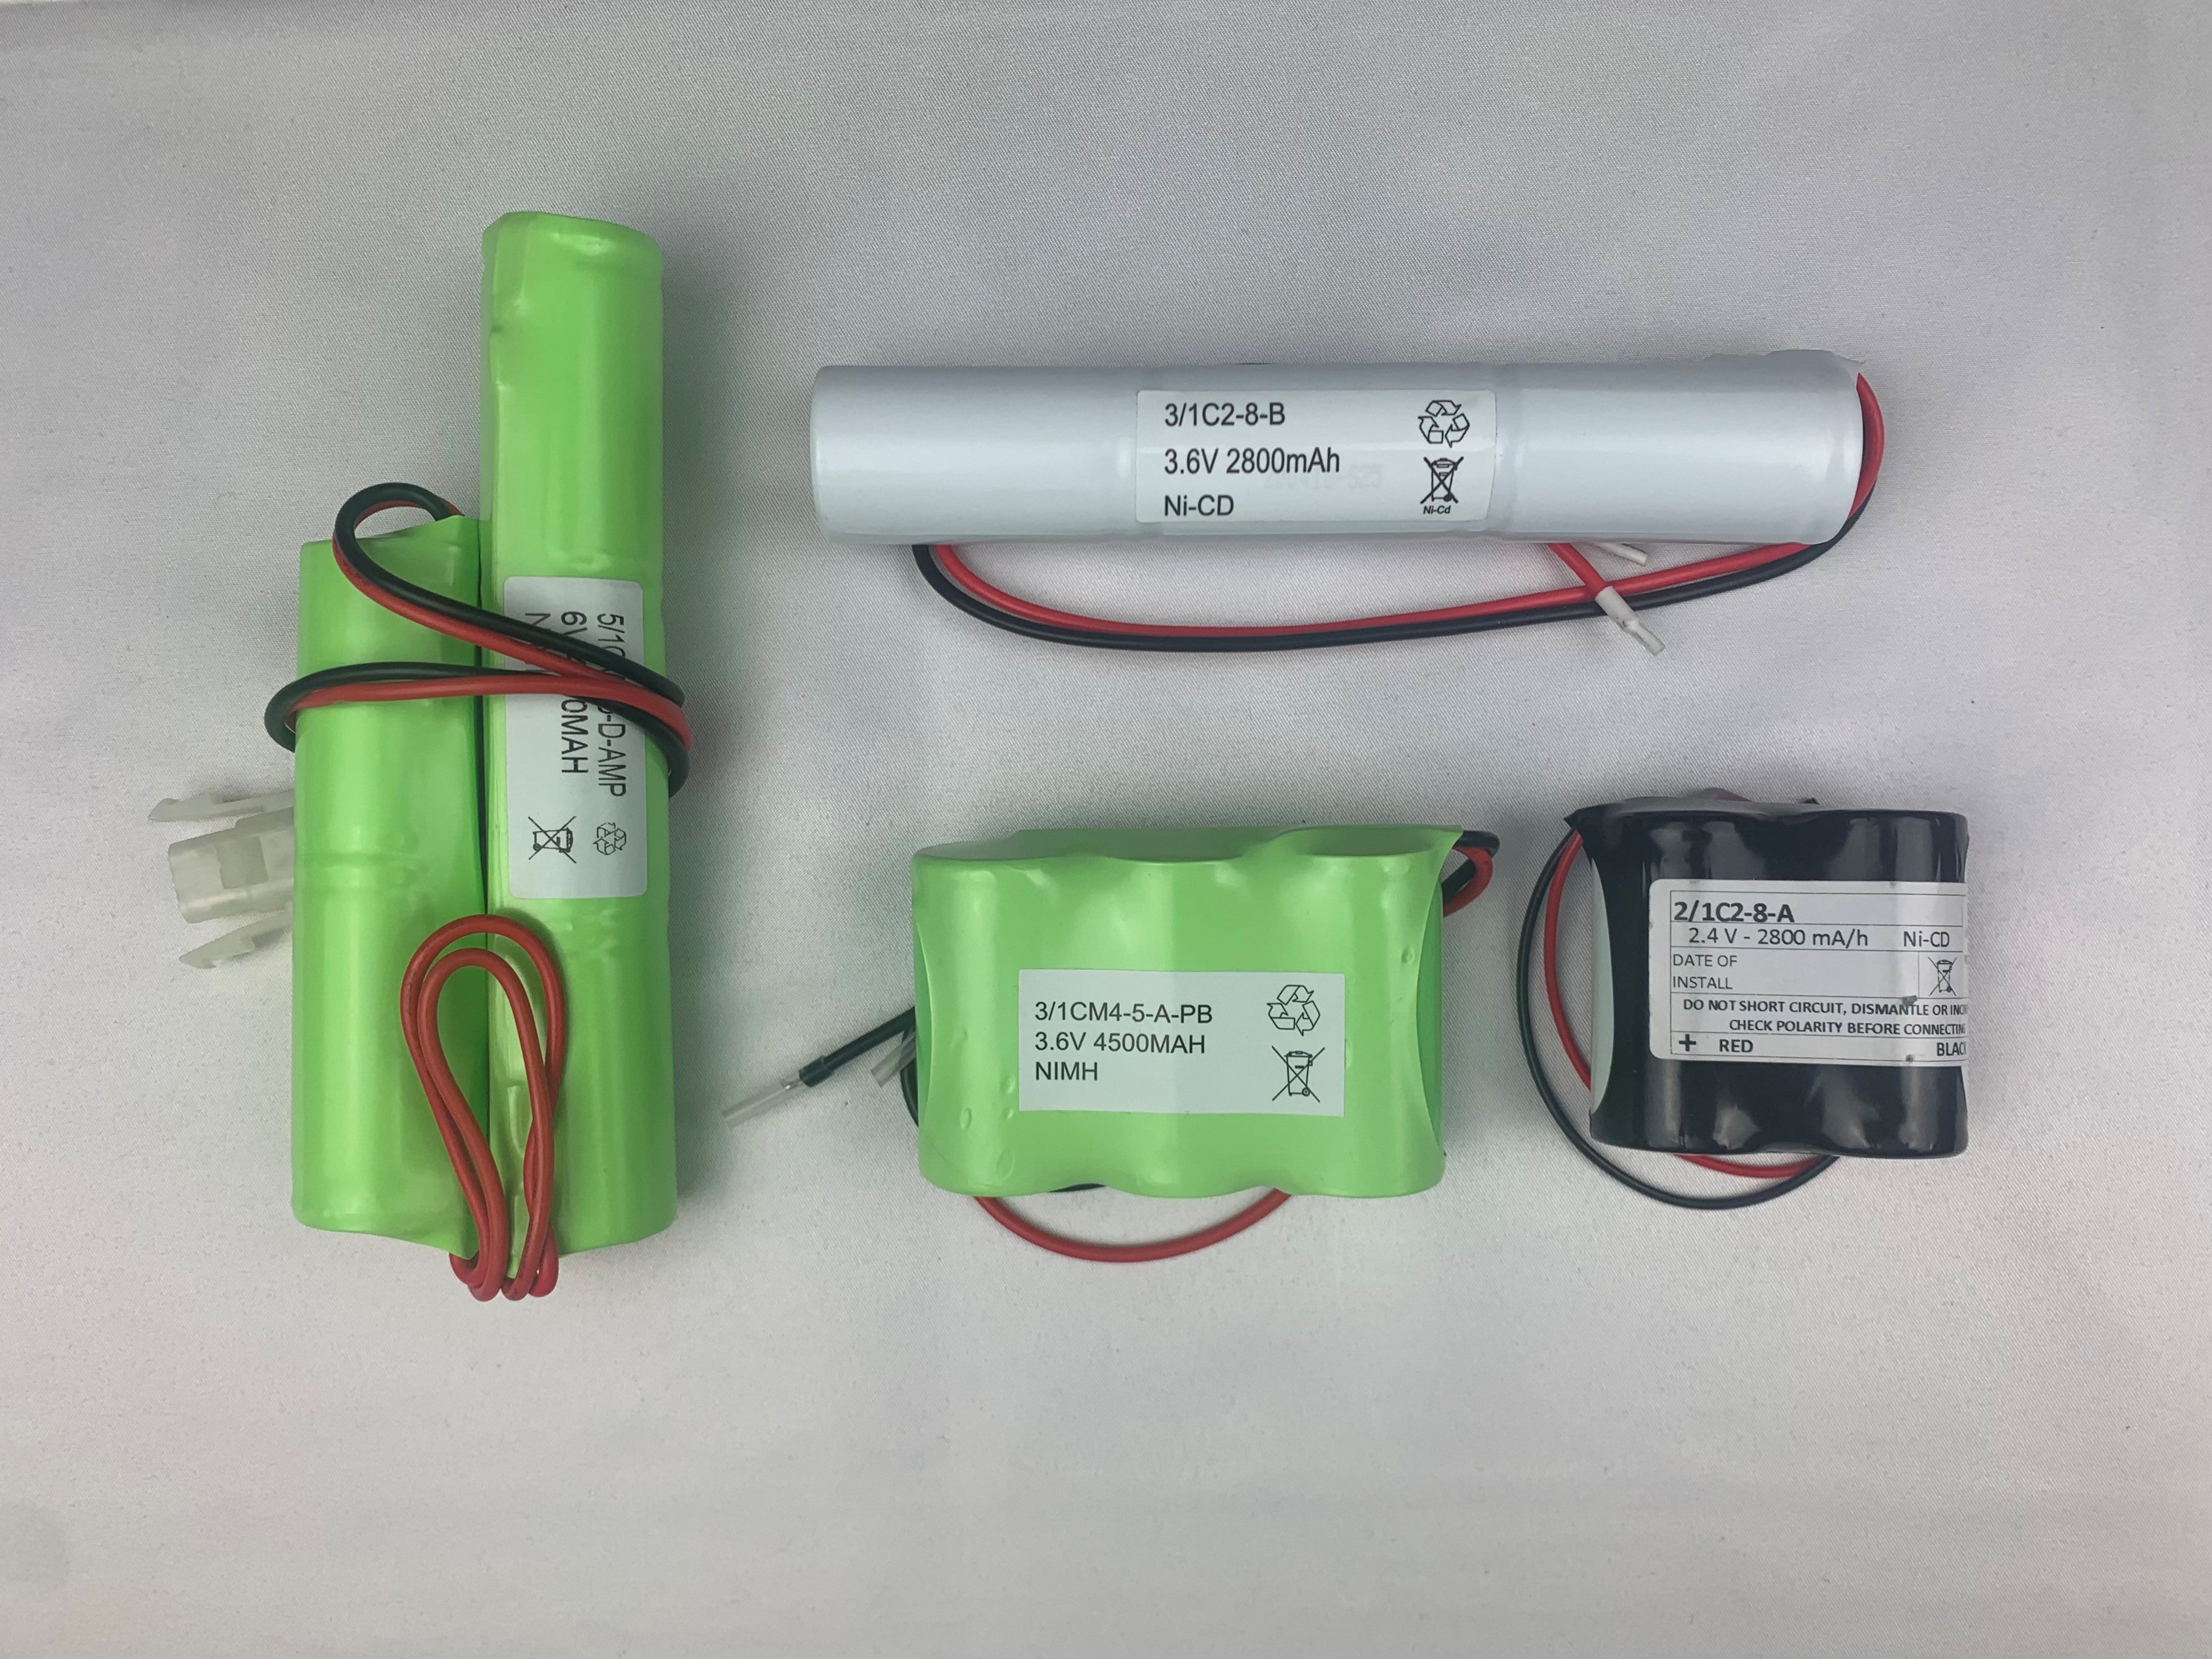 C Size Emergency Batteries Ni-Cd and Ni-Mh 2.8Ah or 4.5Ah C Cell Ni-Cd and Ni-Mh Batteries and Battery Packs Easy Control Gear - Easy Control Gear